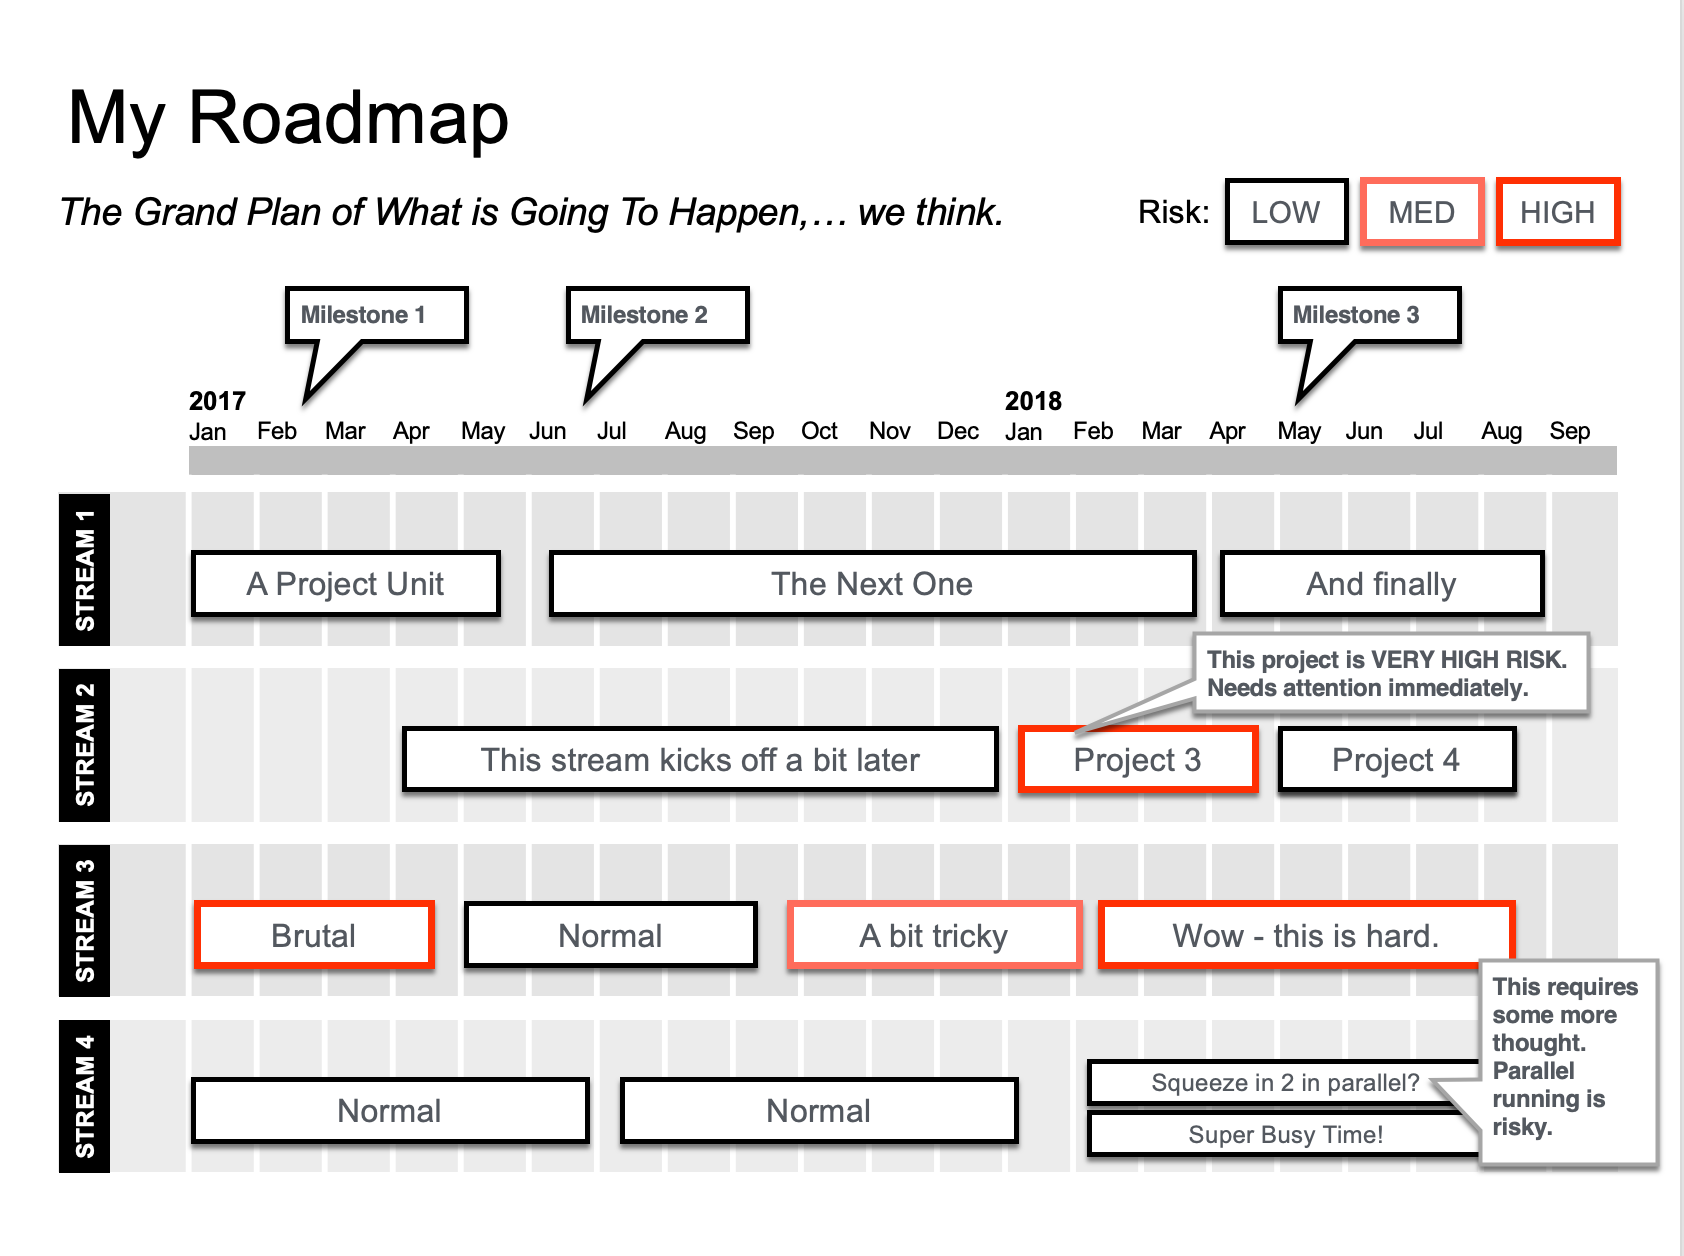 Help tell the story of your roadmap by adding important comments